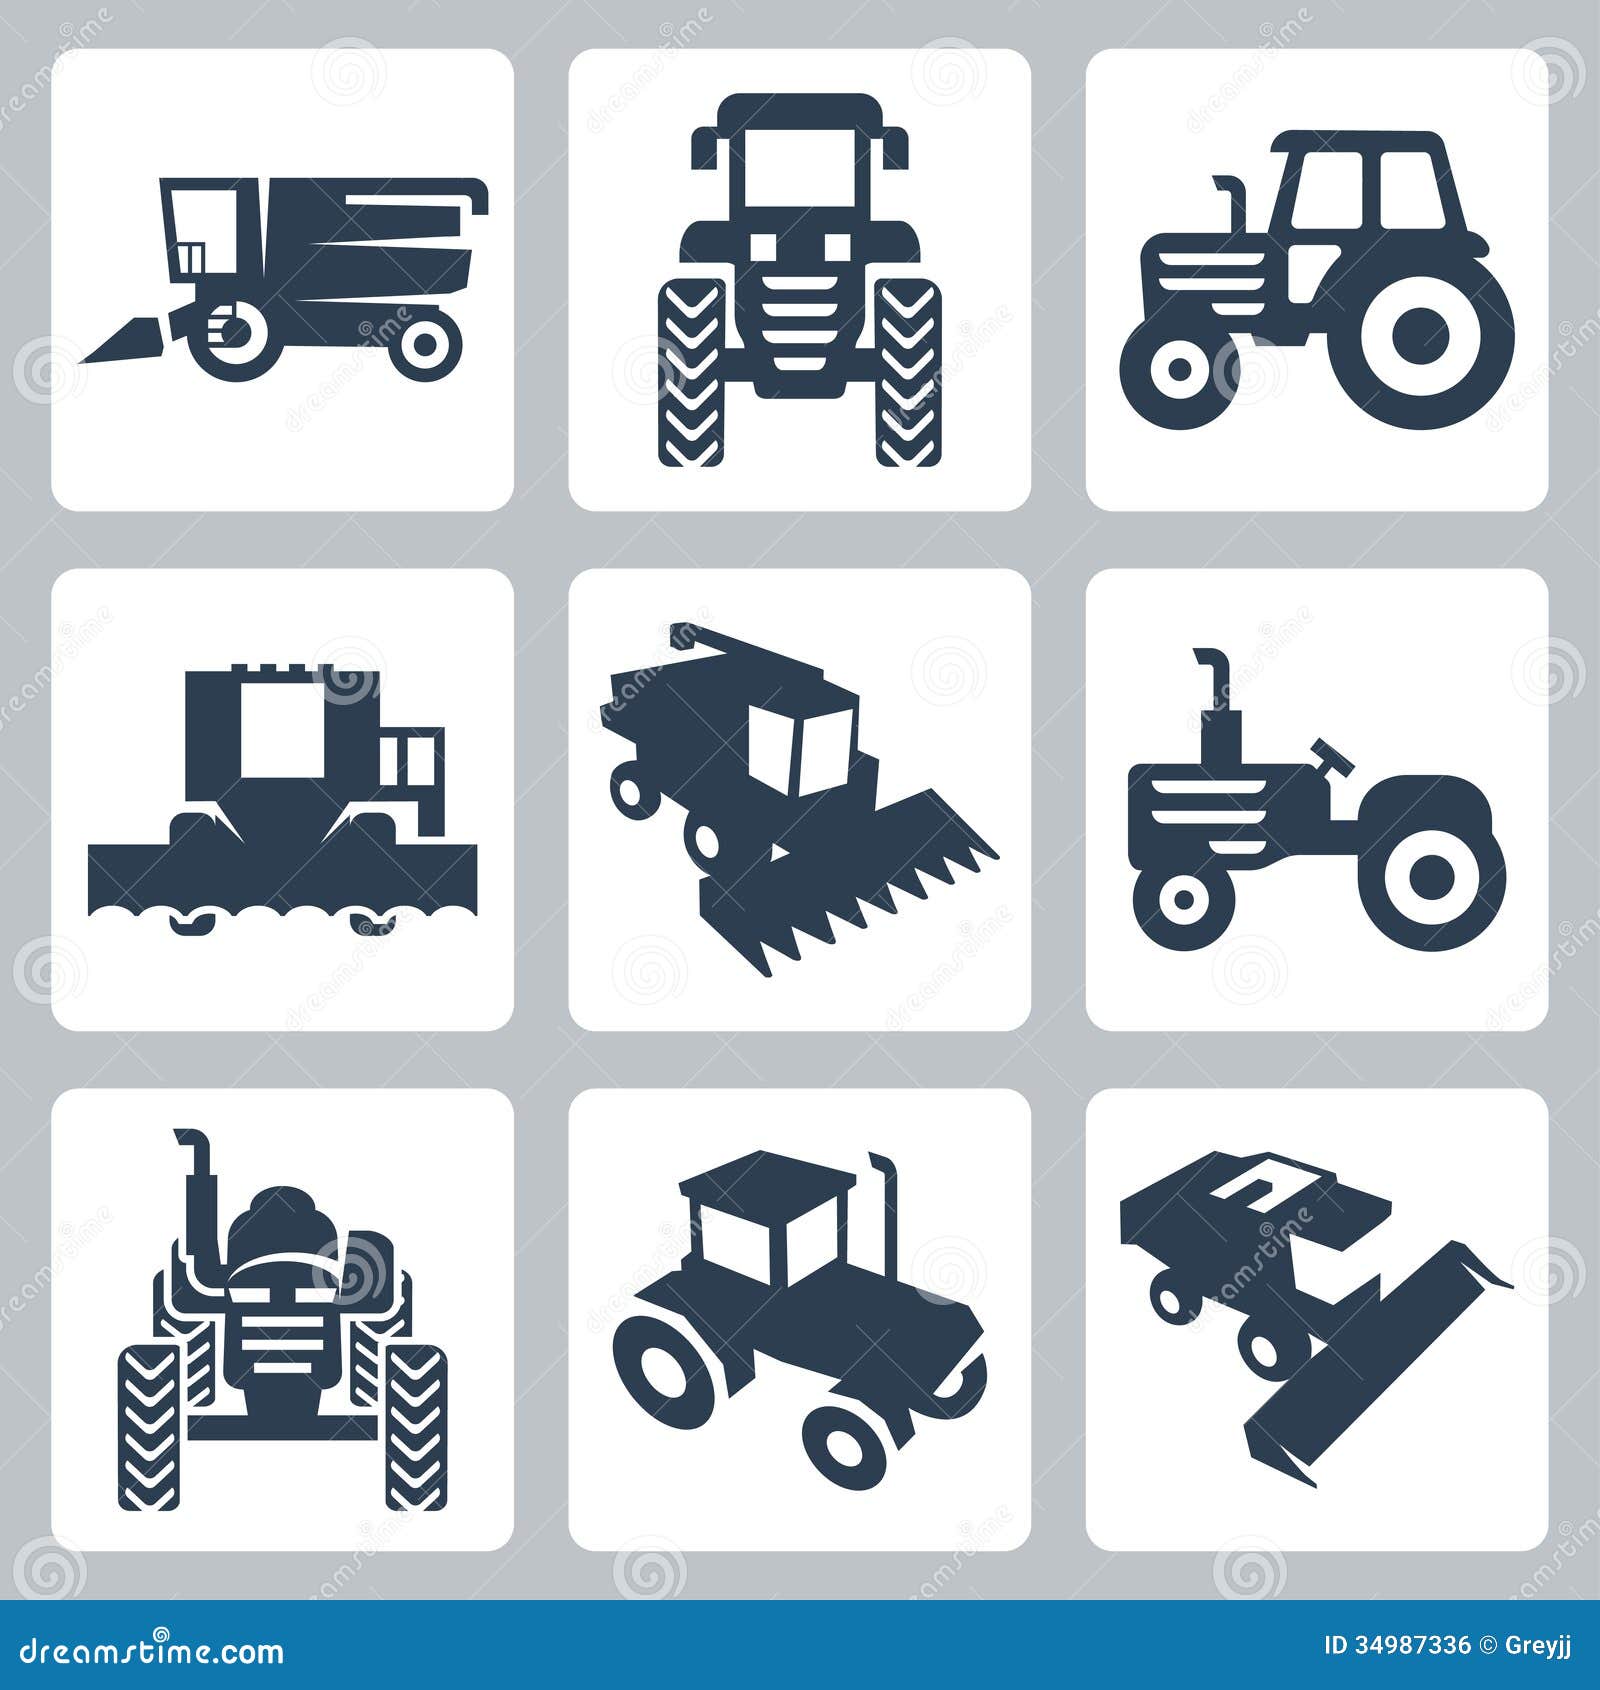  tractor and combine harvester icons